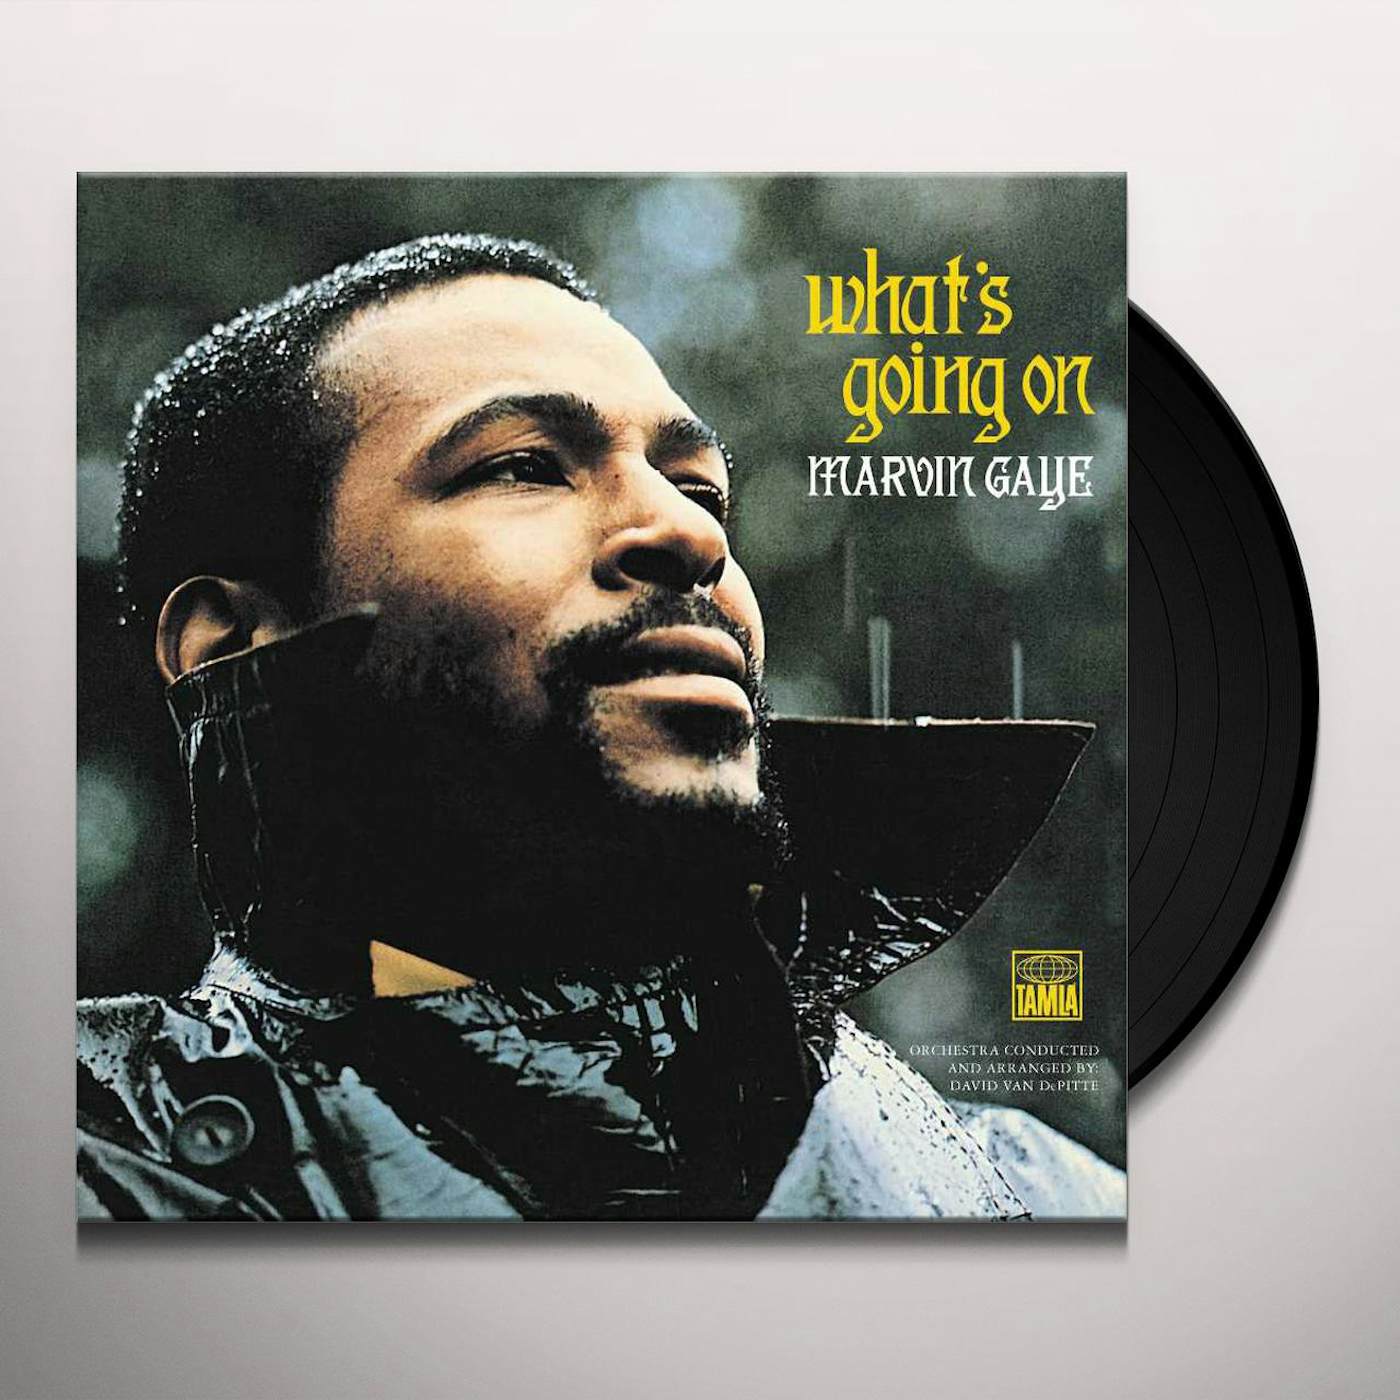 Marvin Gaye - Every Great Motown Hit of Marvin Gaye: 15 Spectacular  Performances (Vinyl LP) - Music Direct